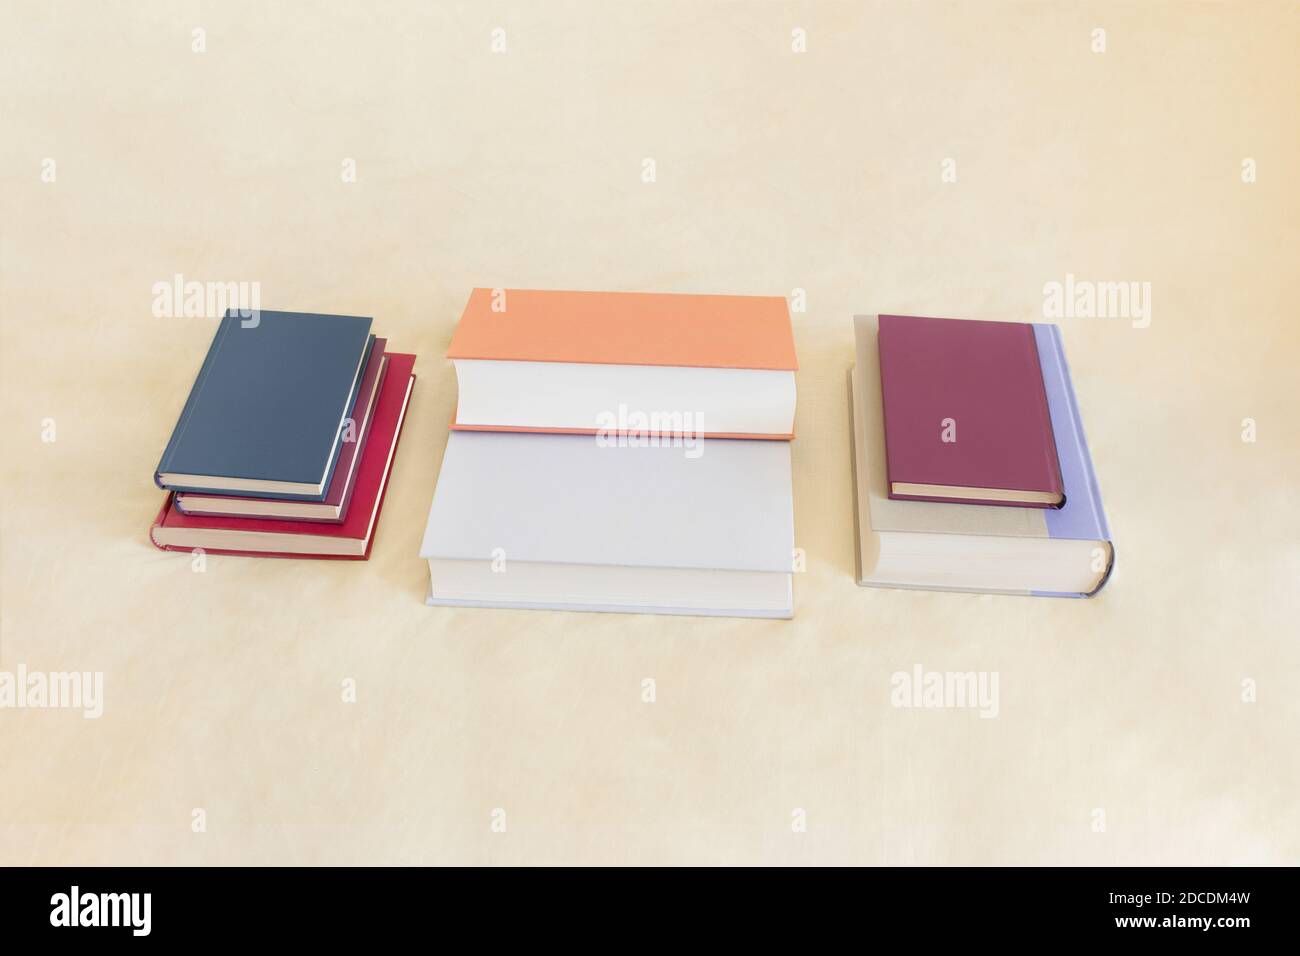 A group of different books of sizes and colors prepared for studying on a textured background. Learning and reading concept. Stock Photo